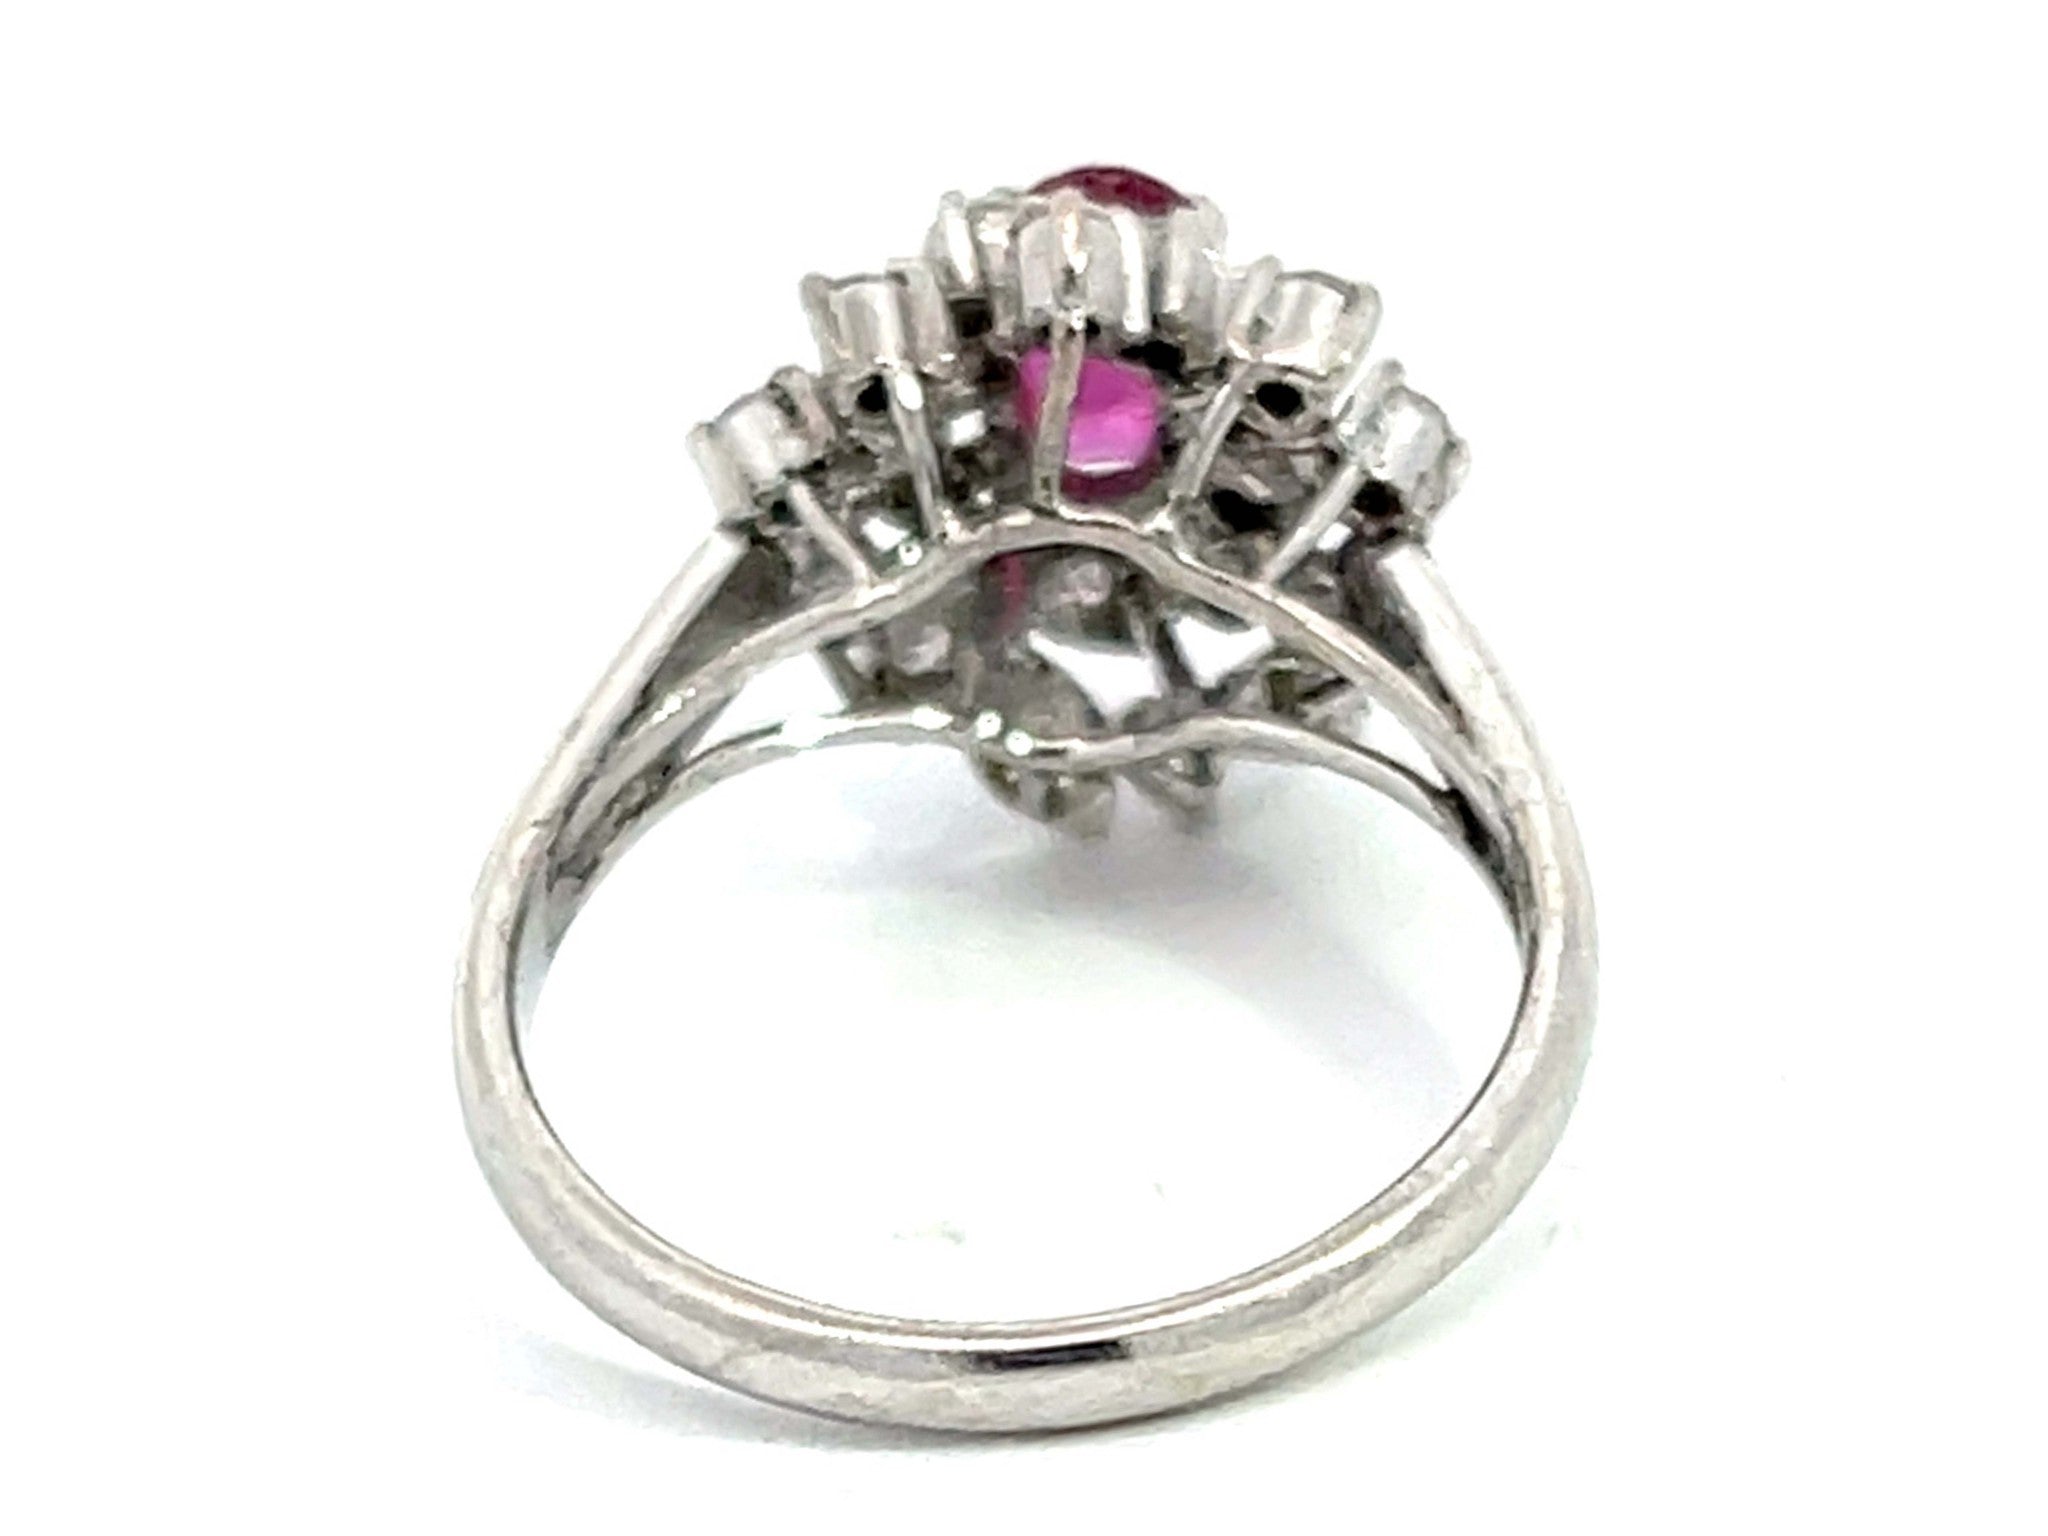 Oval Ruby and Diamond Cluster Ring in 14k White Gold